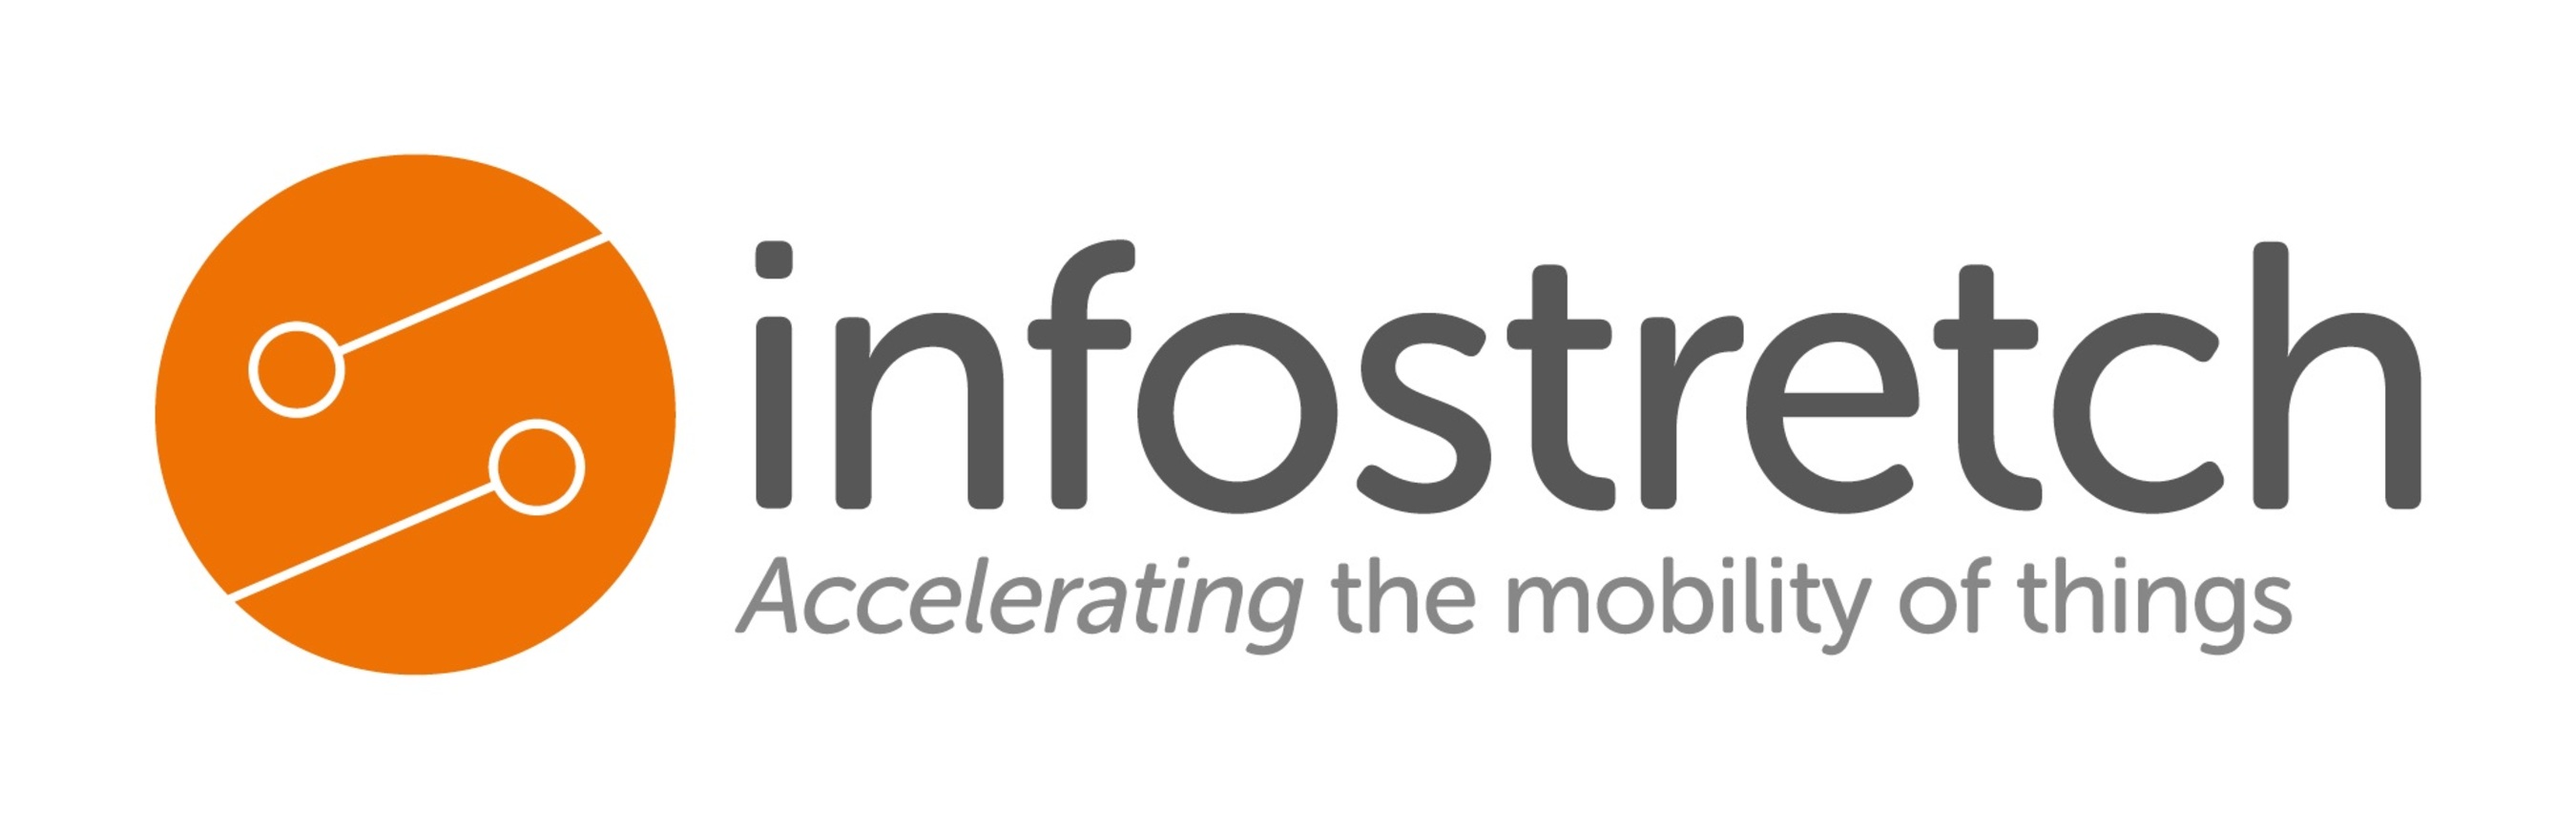 Infostretch: Accelerating the mobility of things